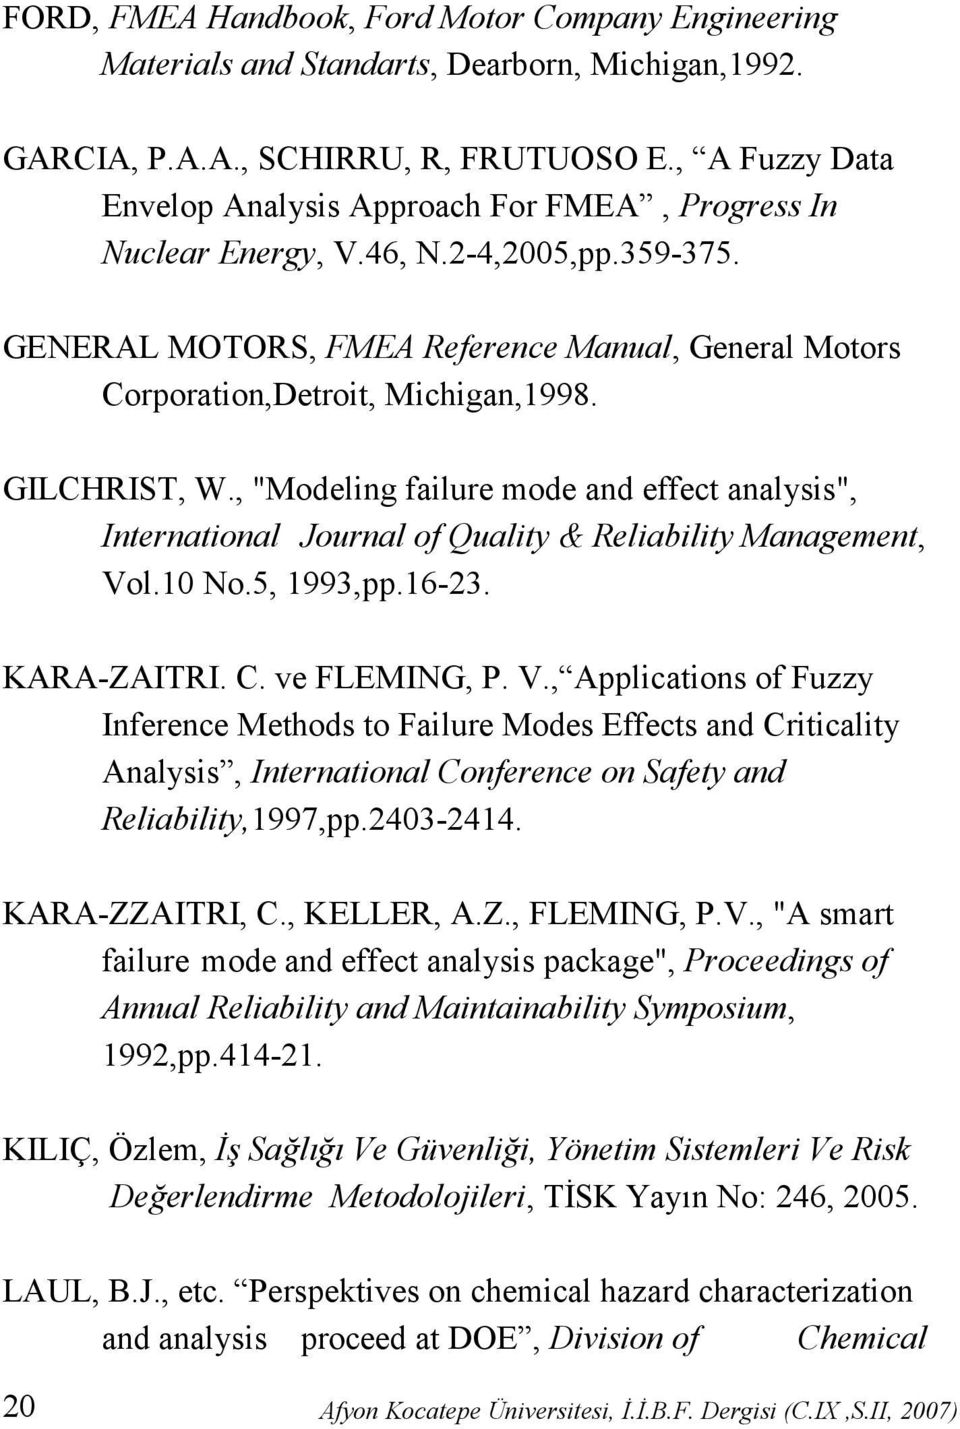 GILCHRIST, W., "Modeling failure mode and effect analysis", International Journal of Quality & Reliability Management, Vo